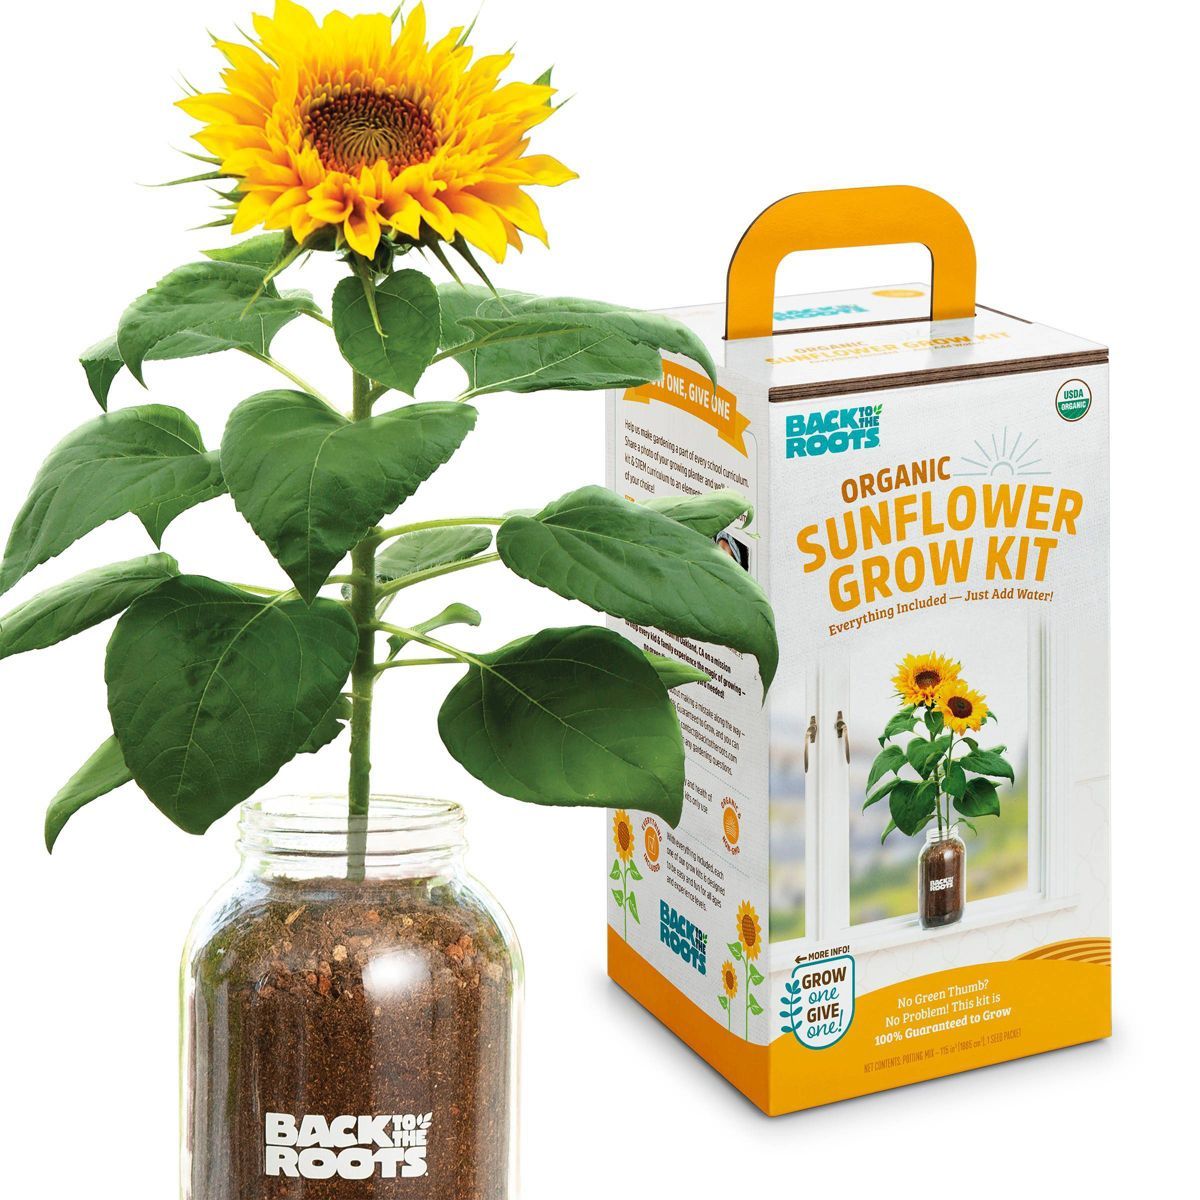 Back to the Roots Organic Sunflower Grow Kit | Target